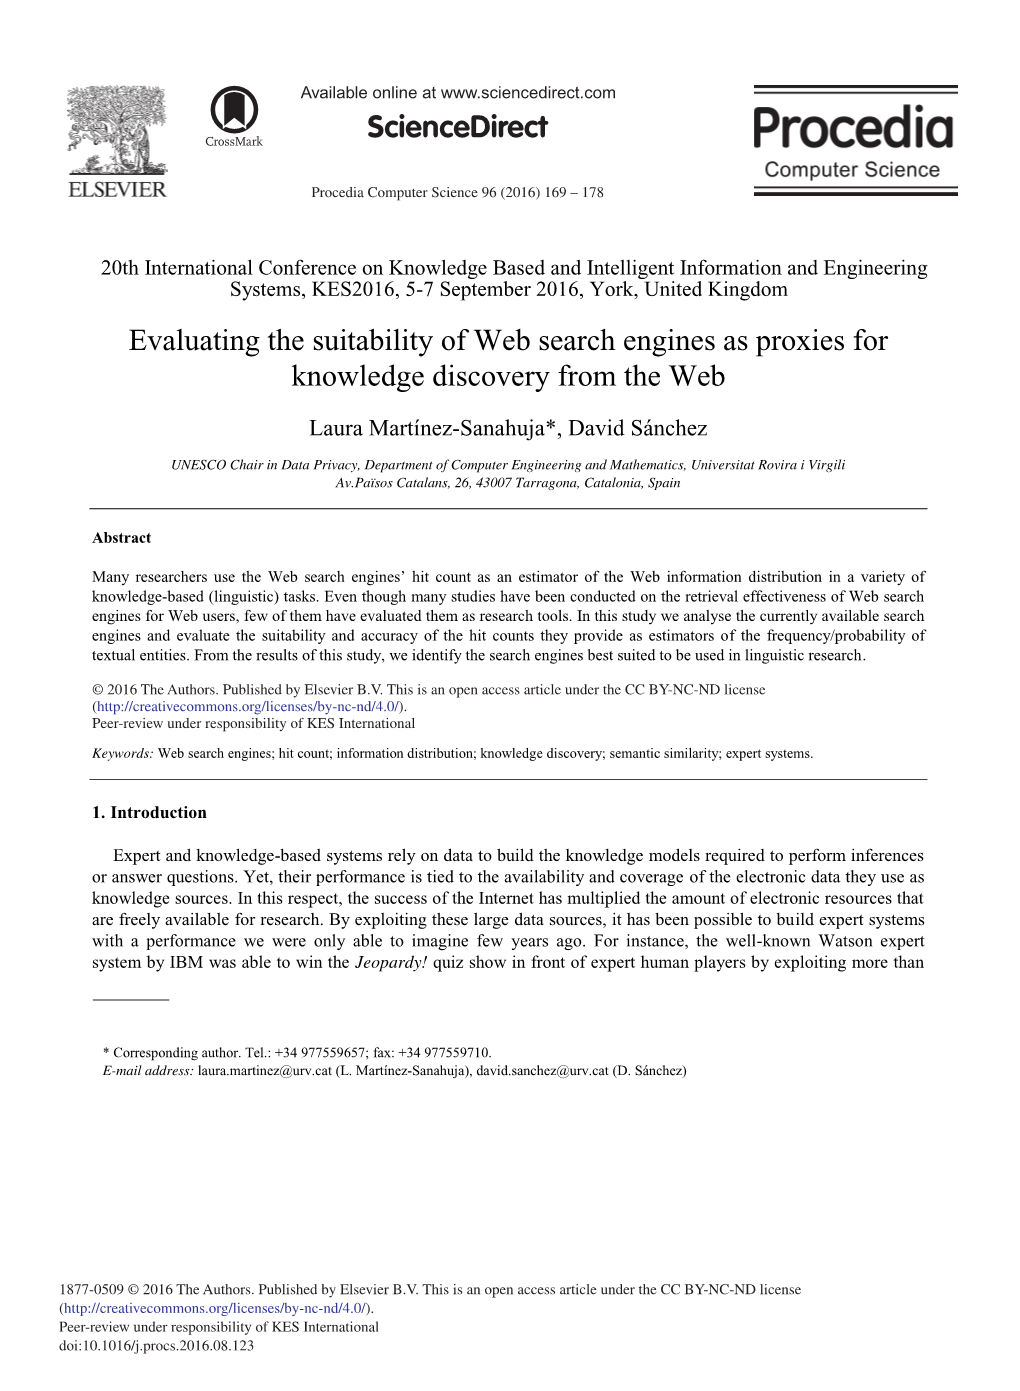 Evaluating the Suitability of Web Search Engines As Proxies for Knowledge Discovery from the Web